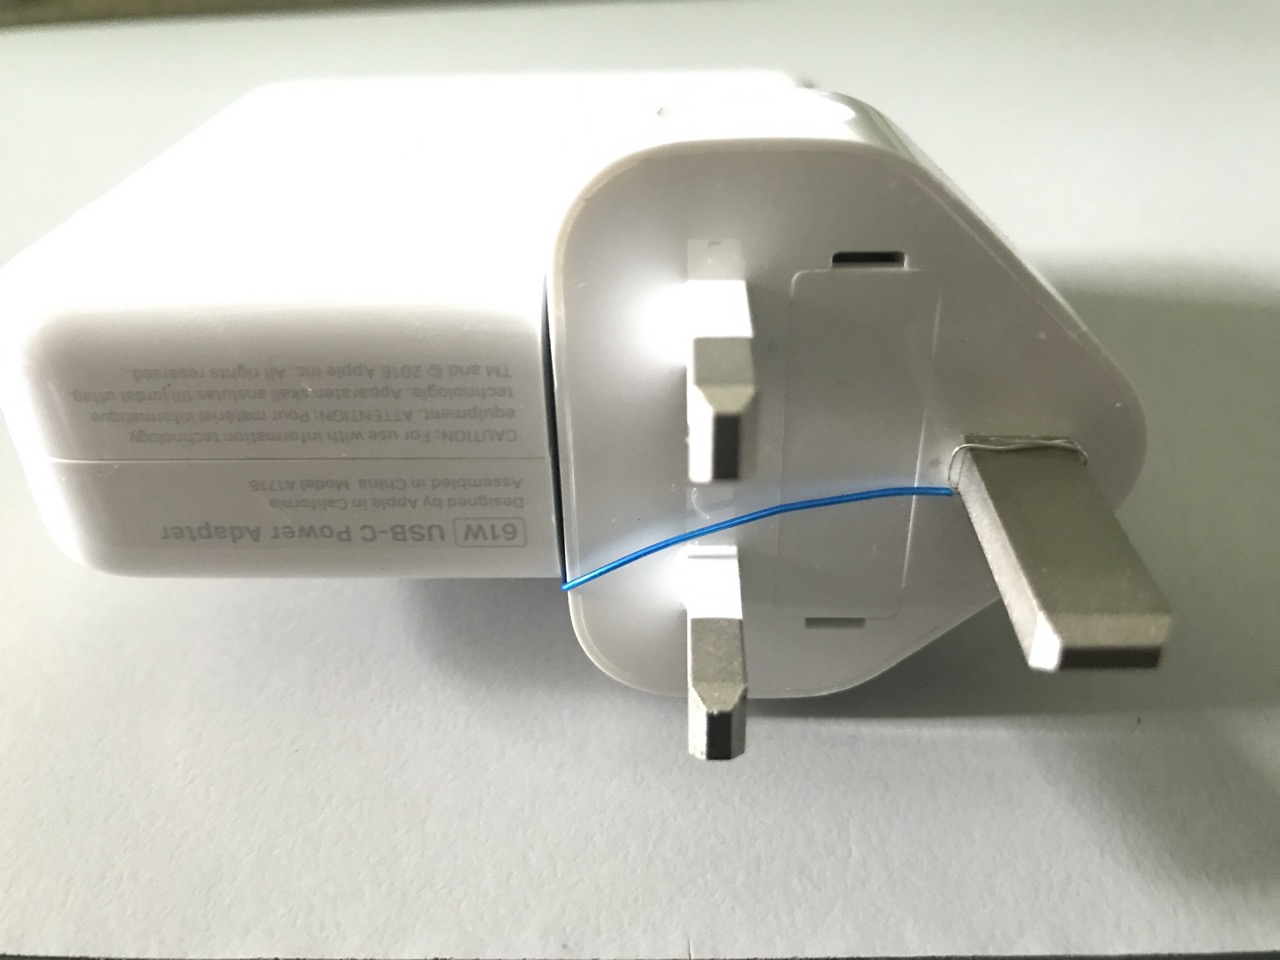 Plug inserted into power adapter